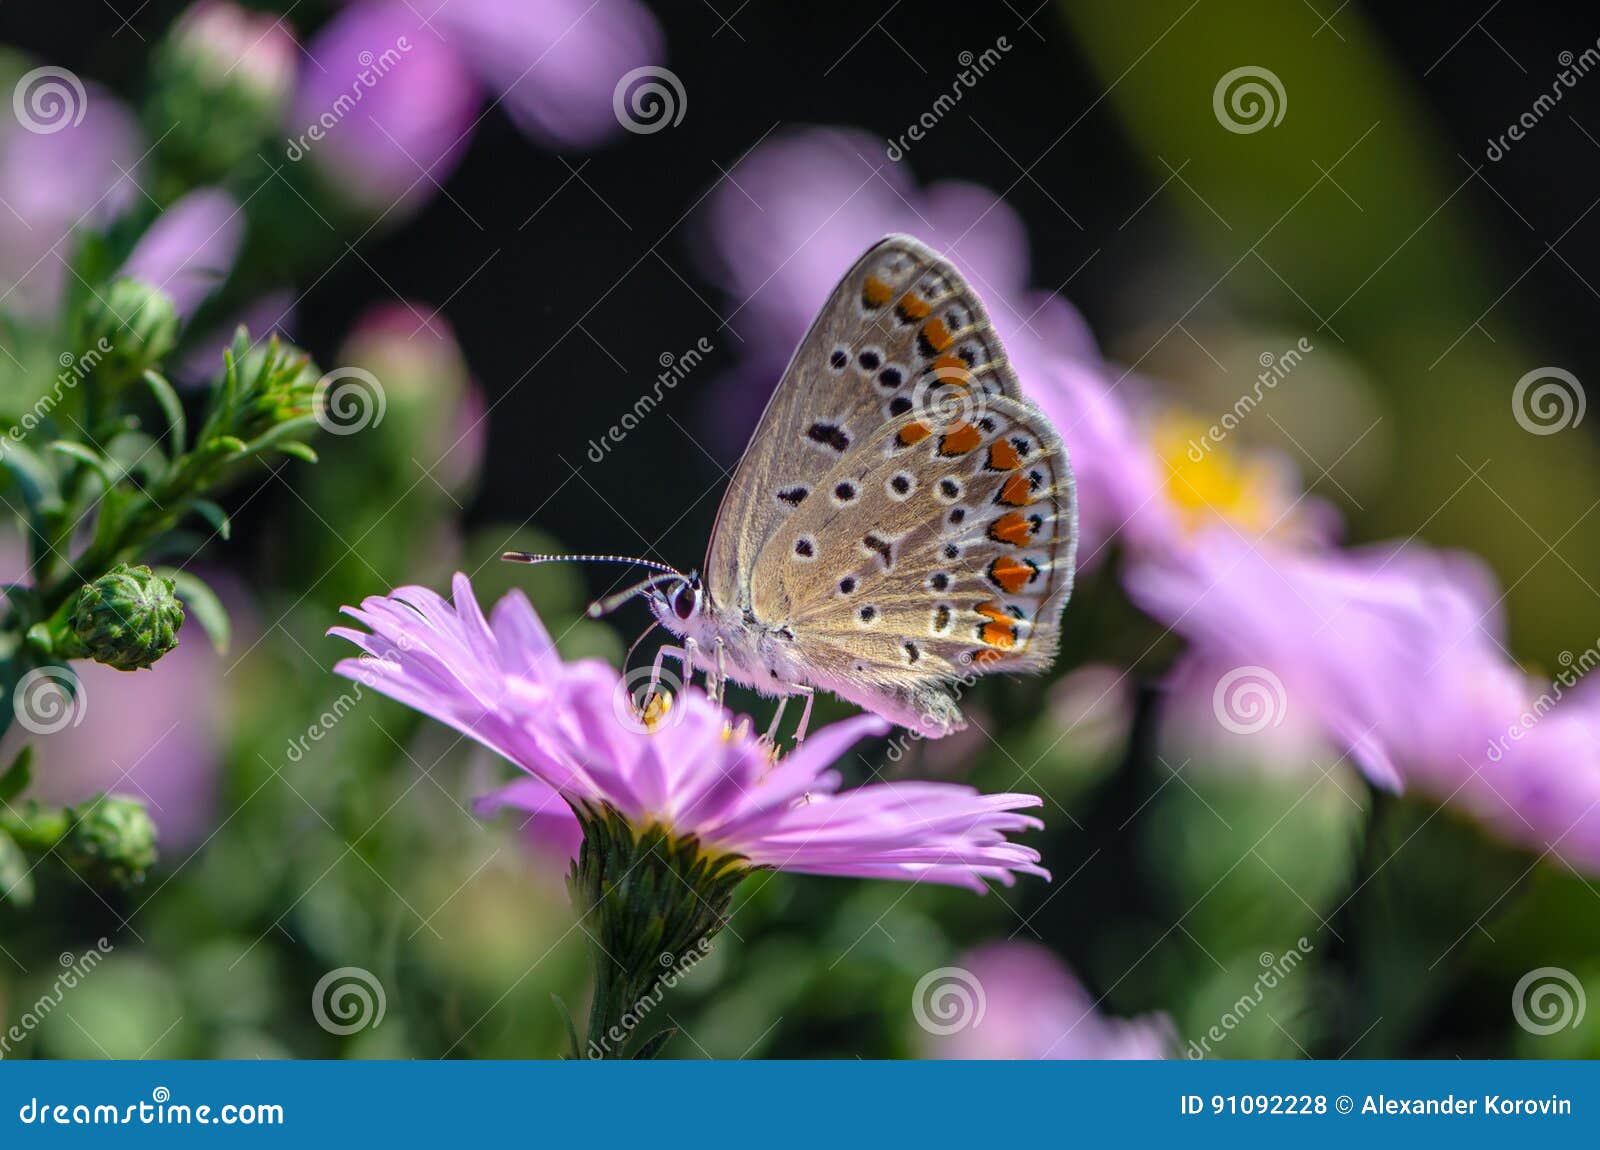 butterfly of aricia agestis collects nectar on a bud of astra